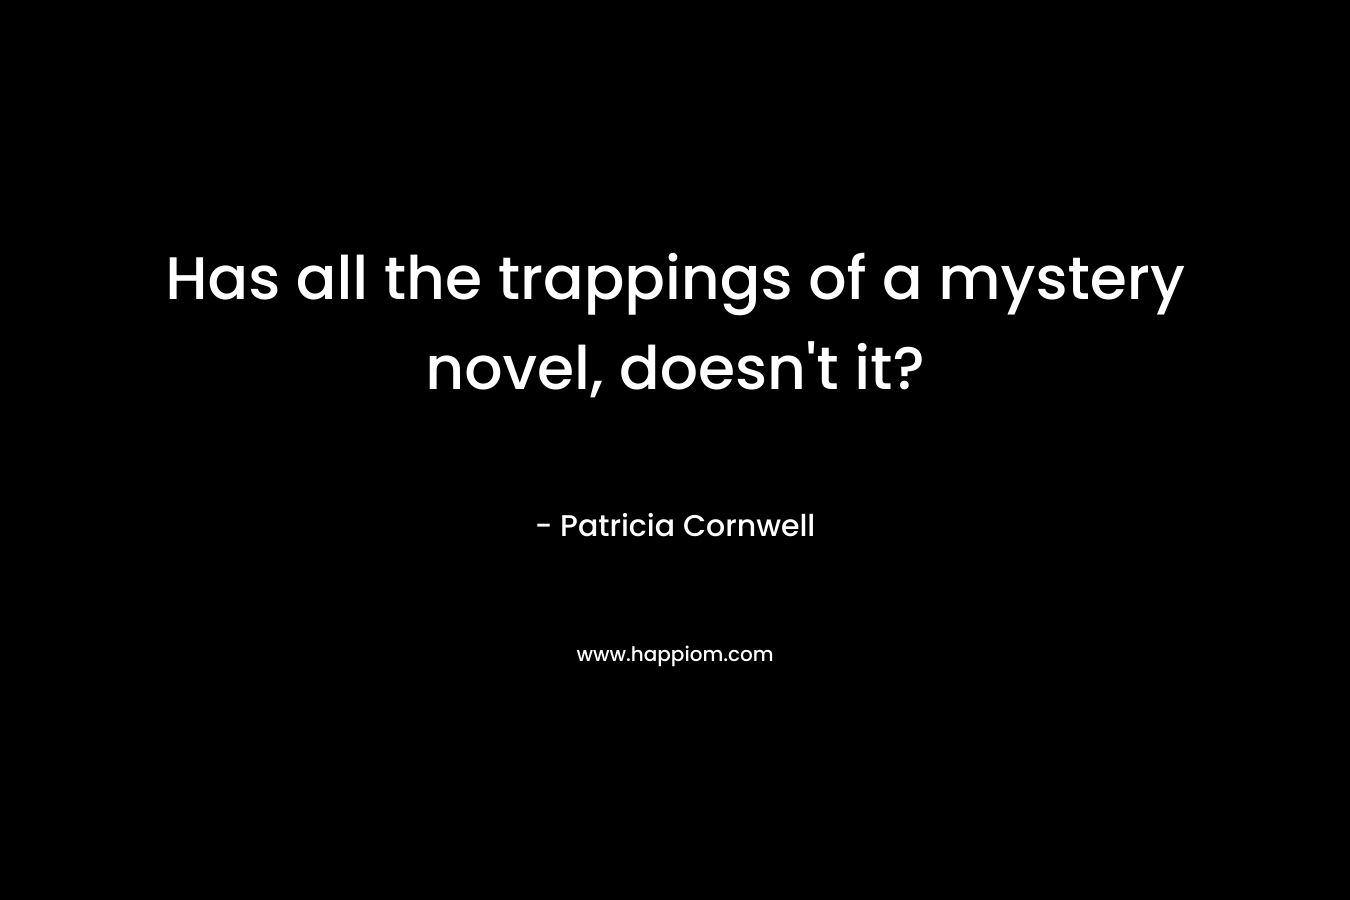 Has all the trappings of a mystery novel, doesn’t it? – Patricia Cornwell